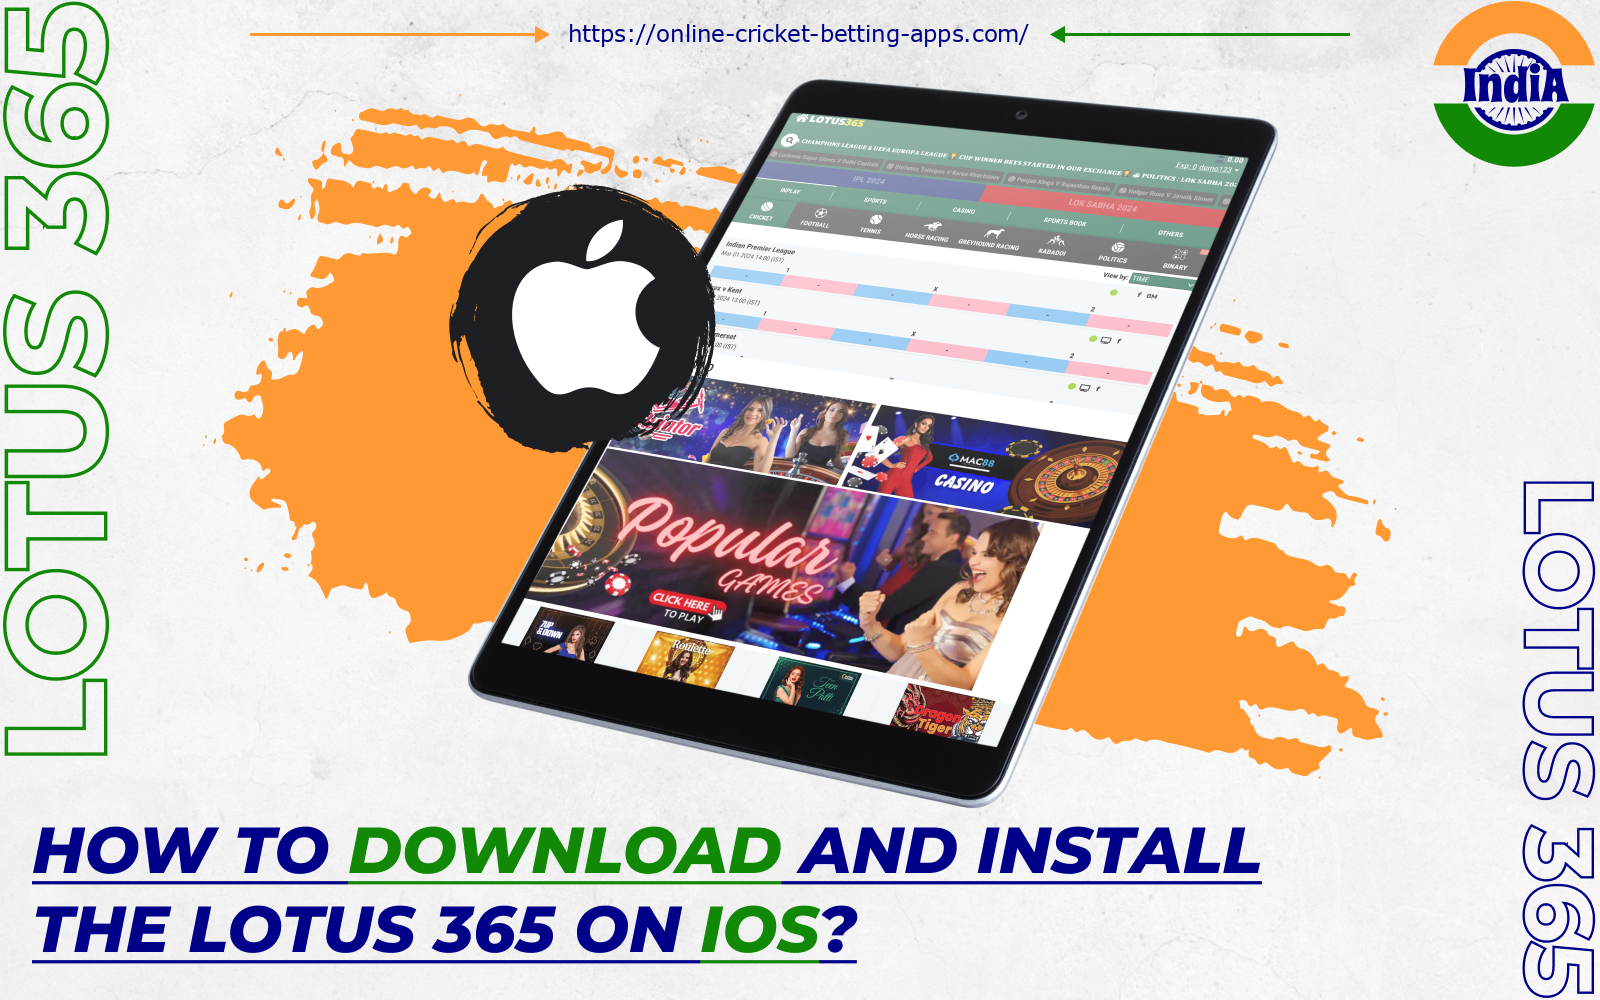 Players from India can easily download Lotus365 on their iOS smartphone and bet at any convenient time